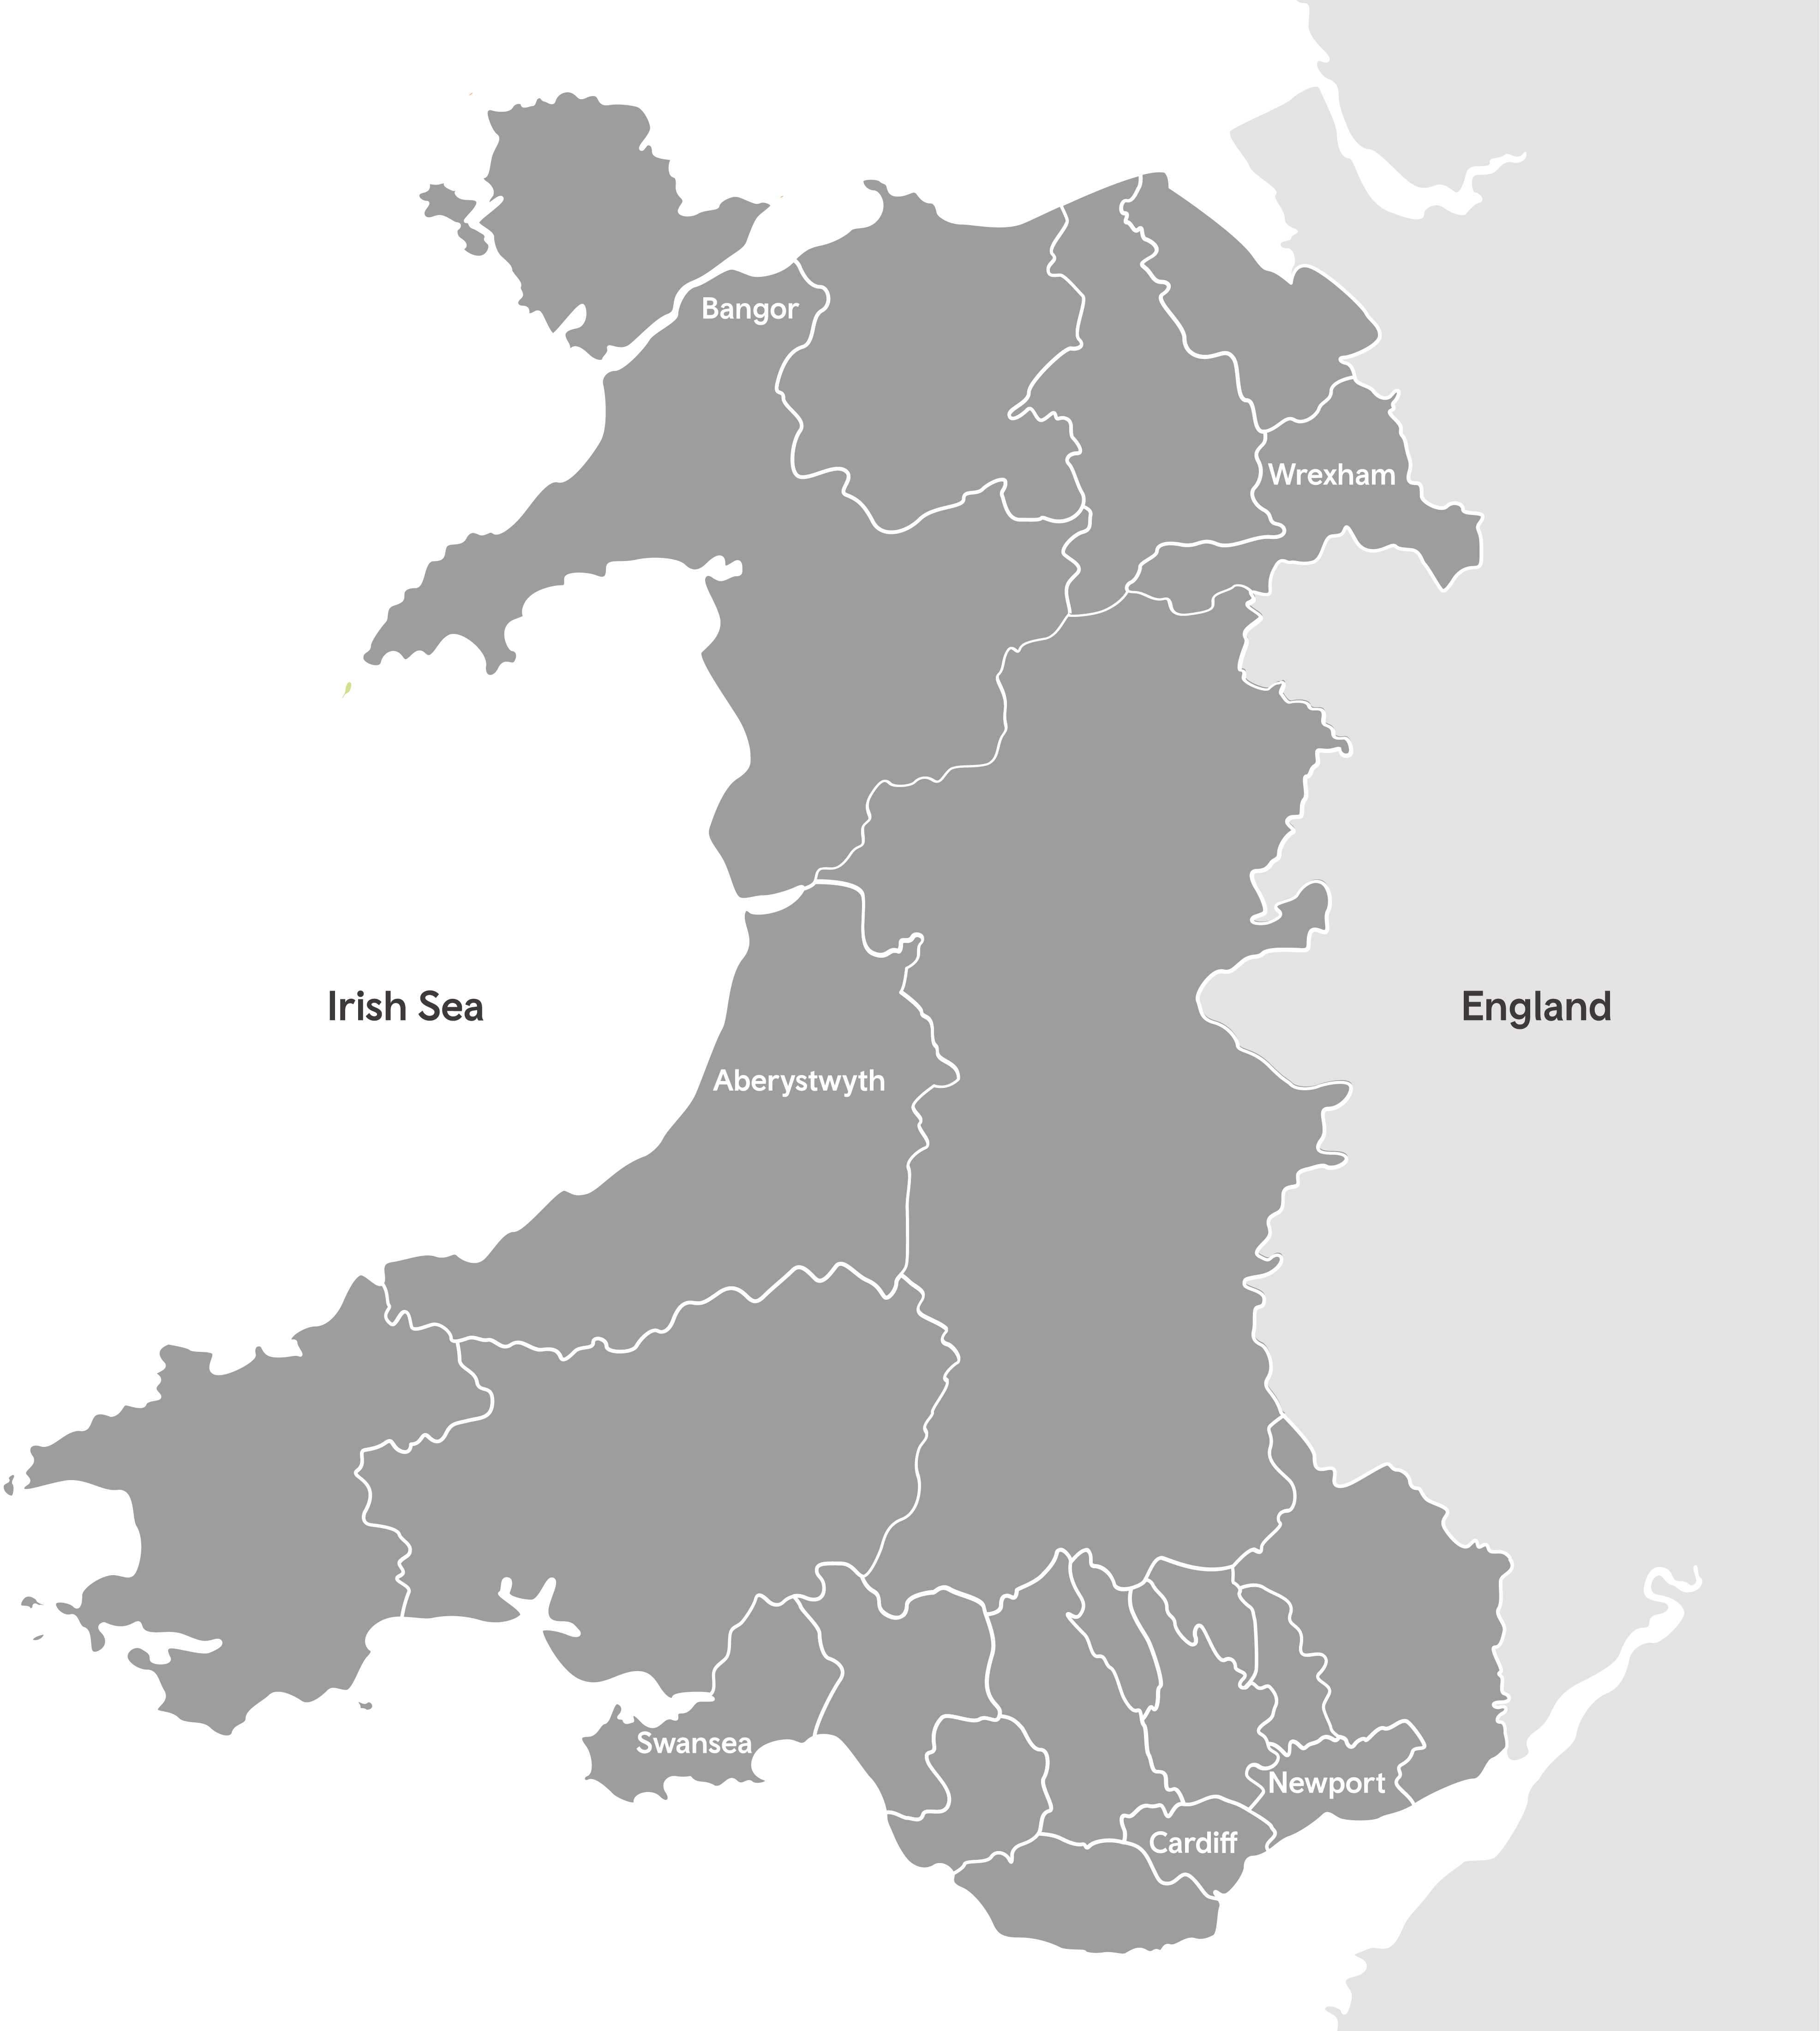 Map of Wales and the universities